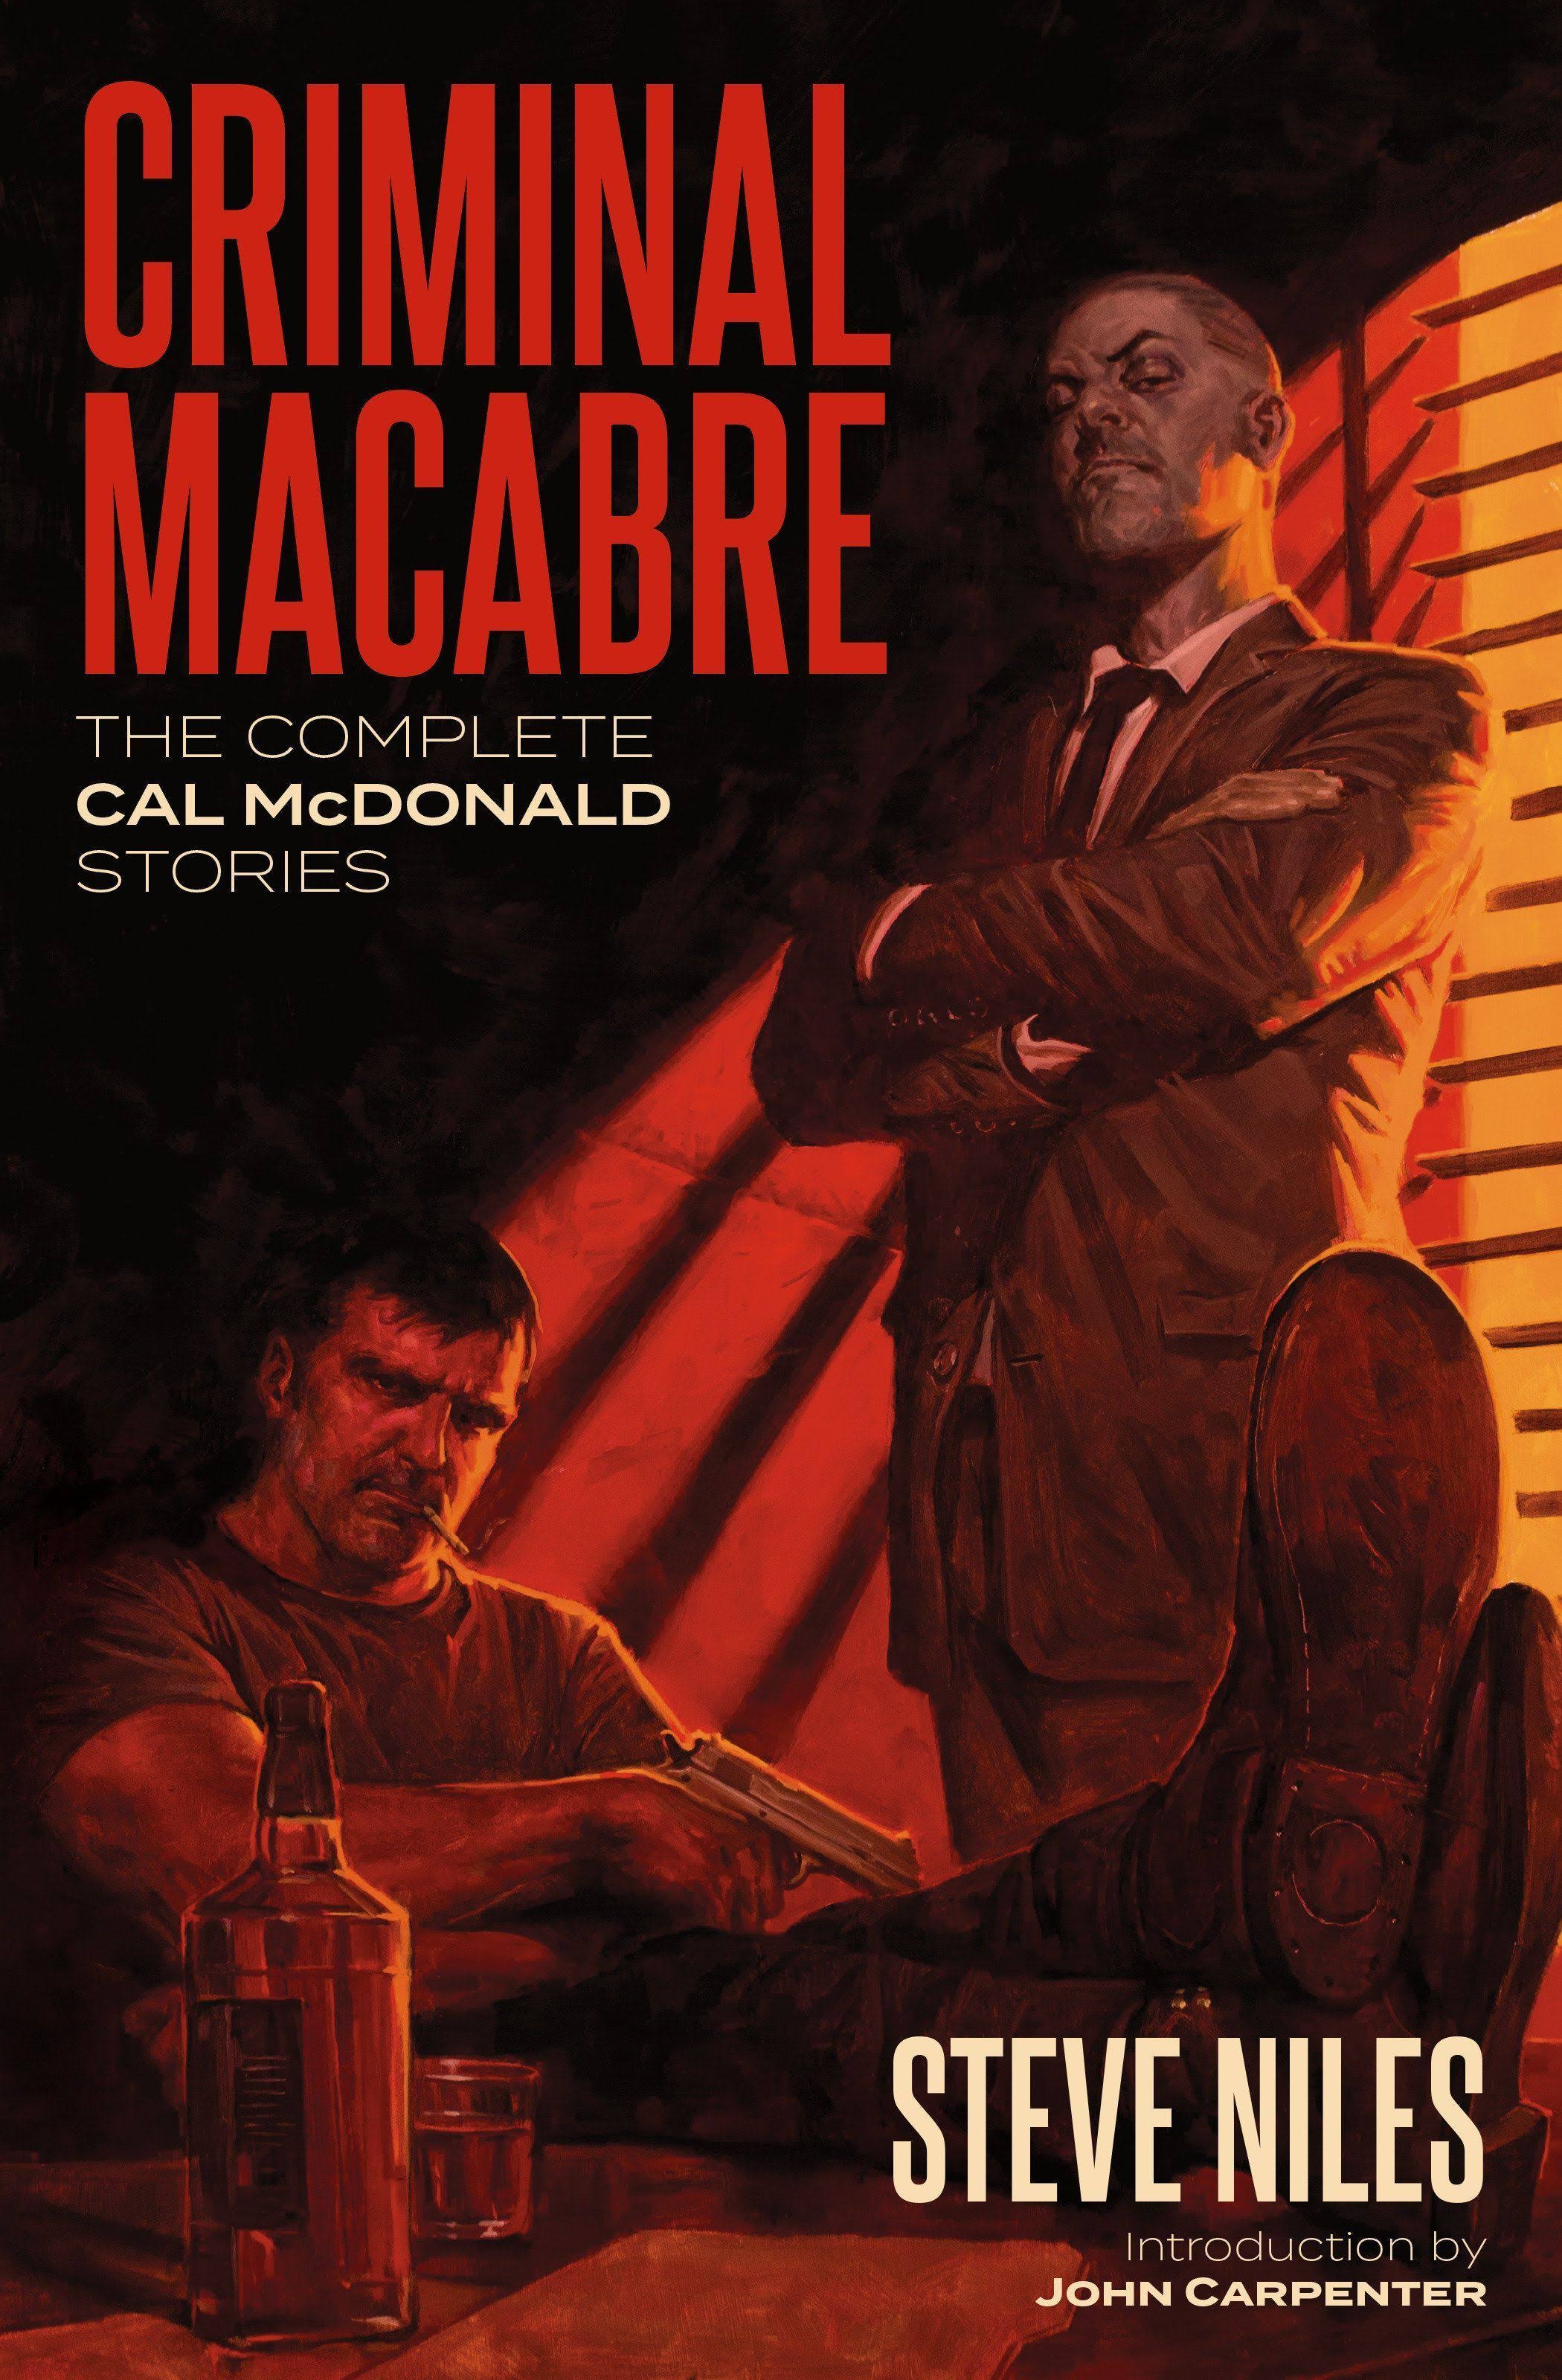 Criminal Macabre: The Complete Cal McDonald Stories (Second Edition) [Book]